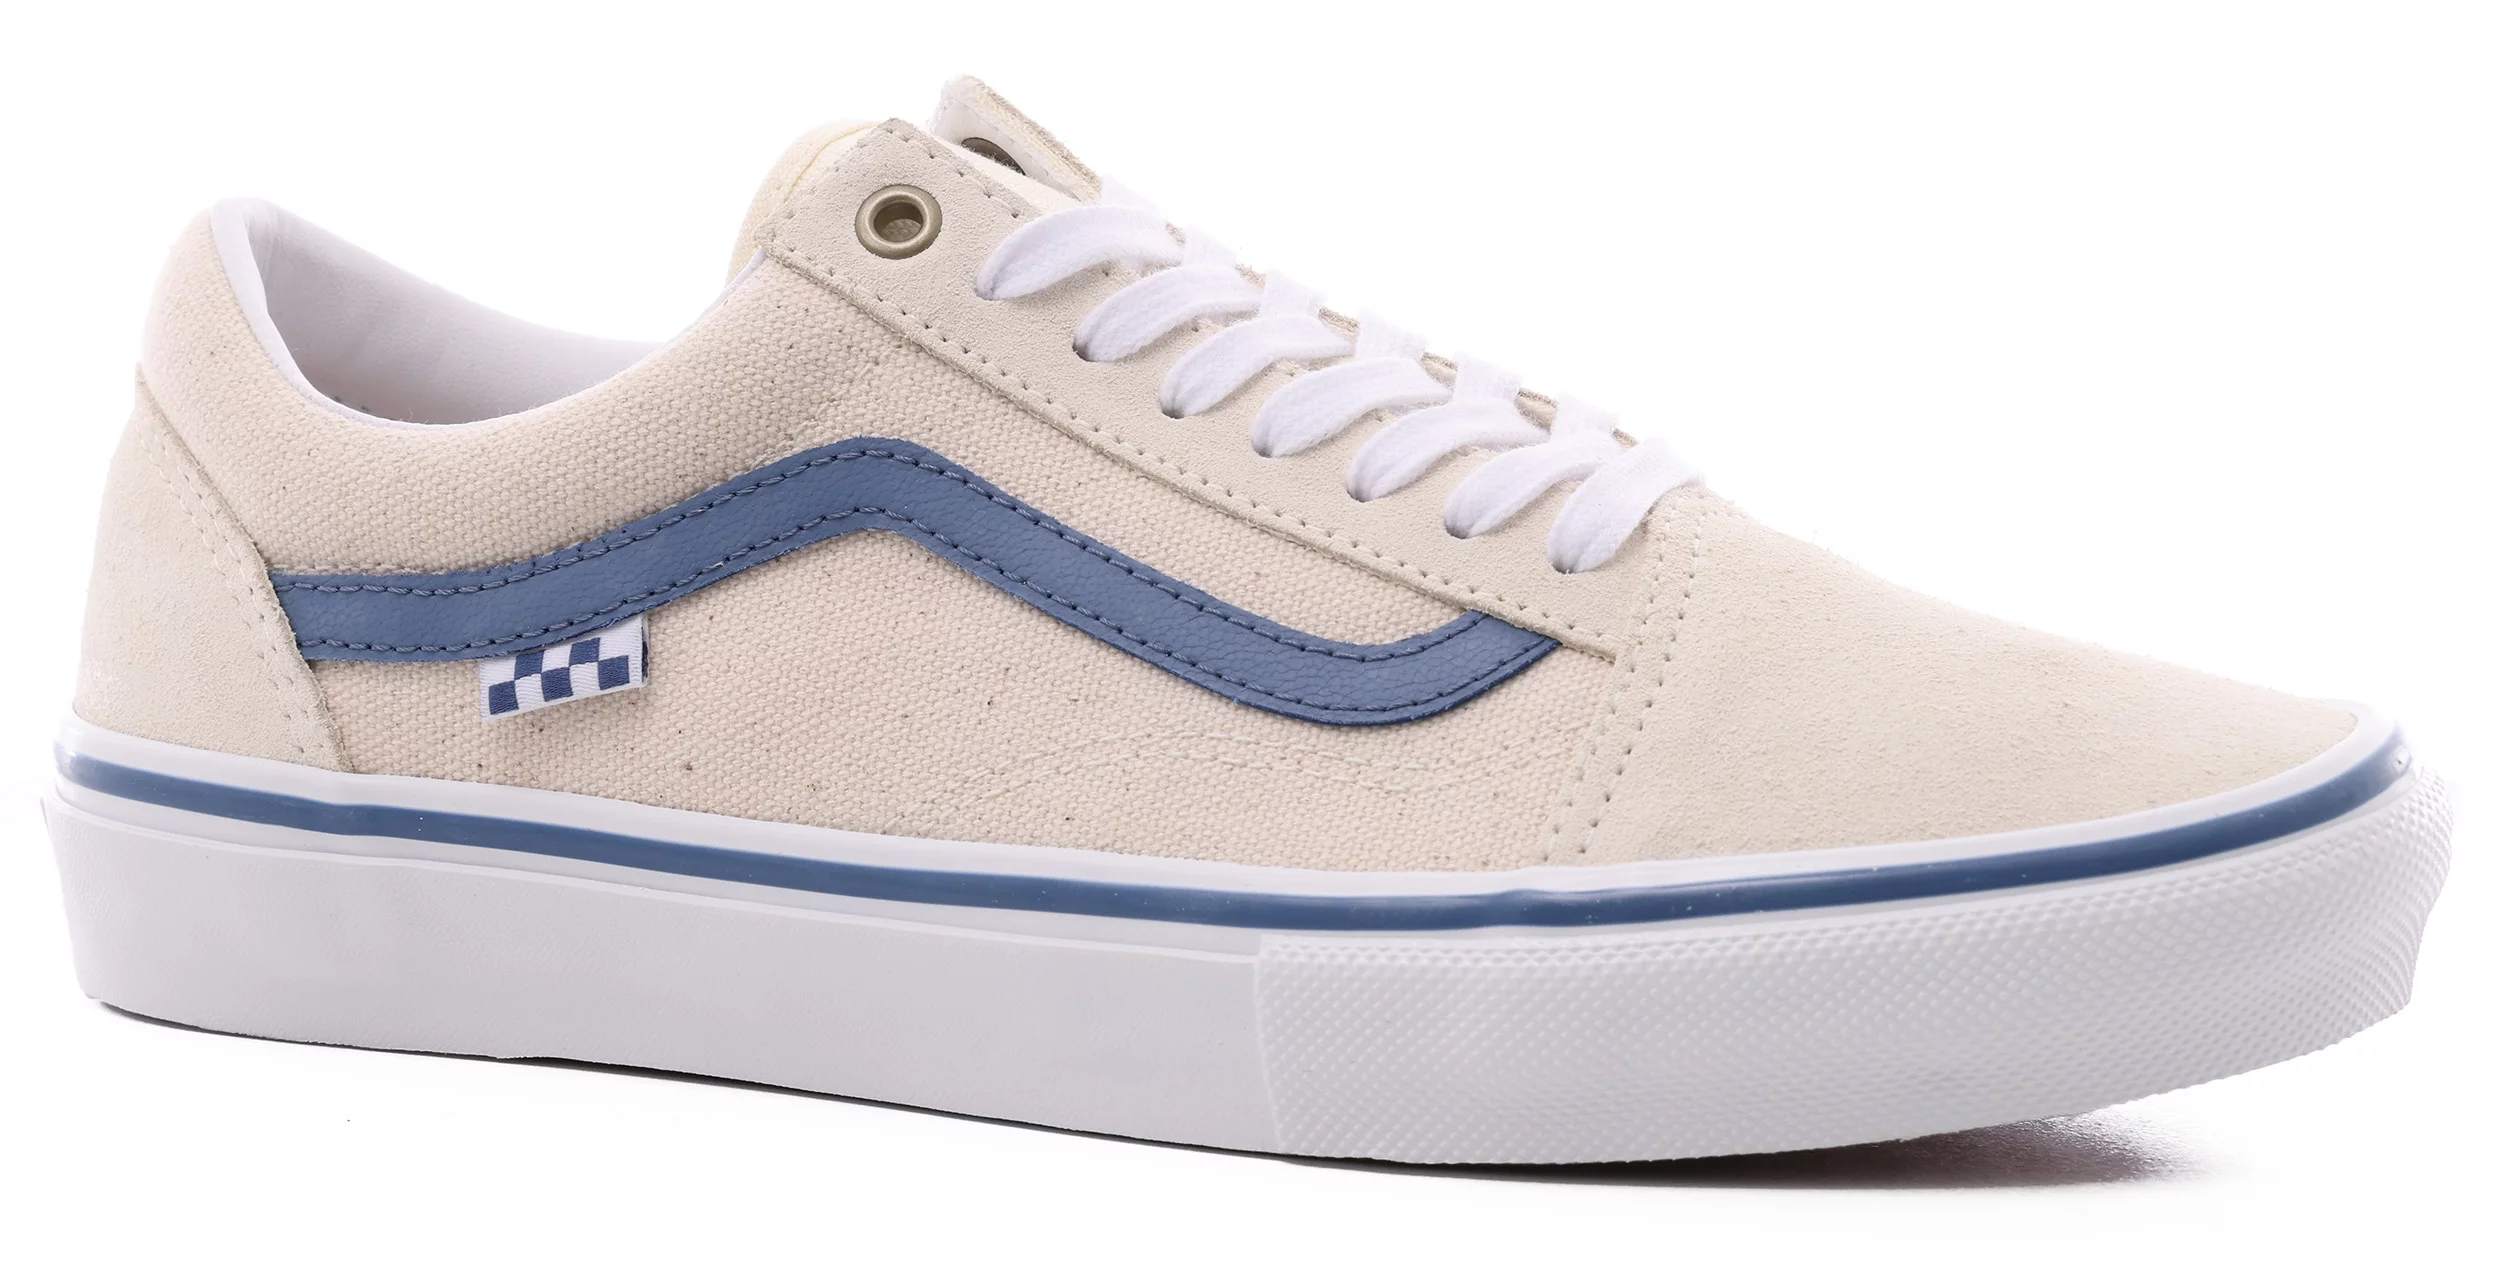 Vans Skate Old Skool Shoes - (raw canvas) classic